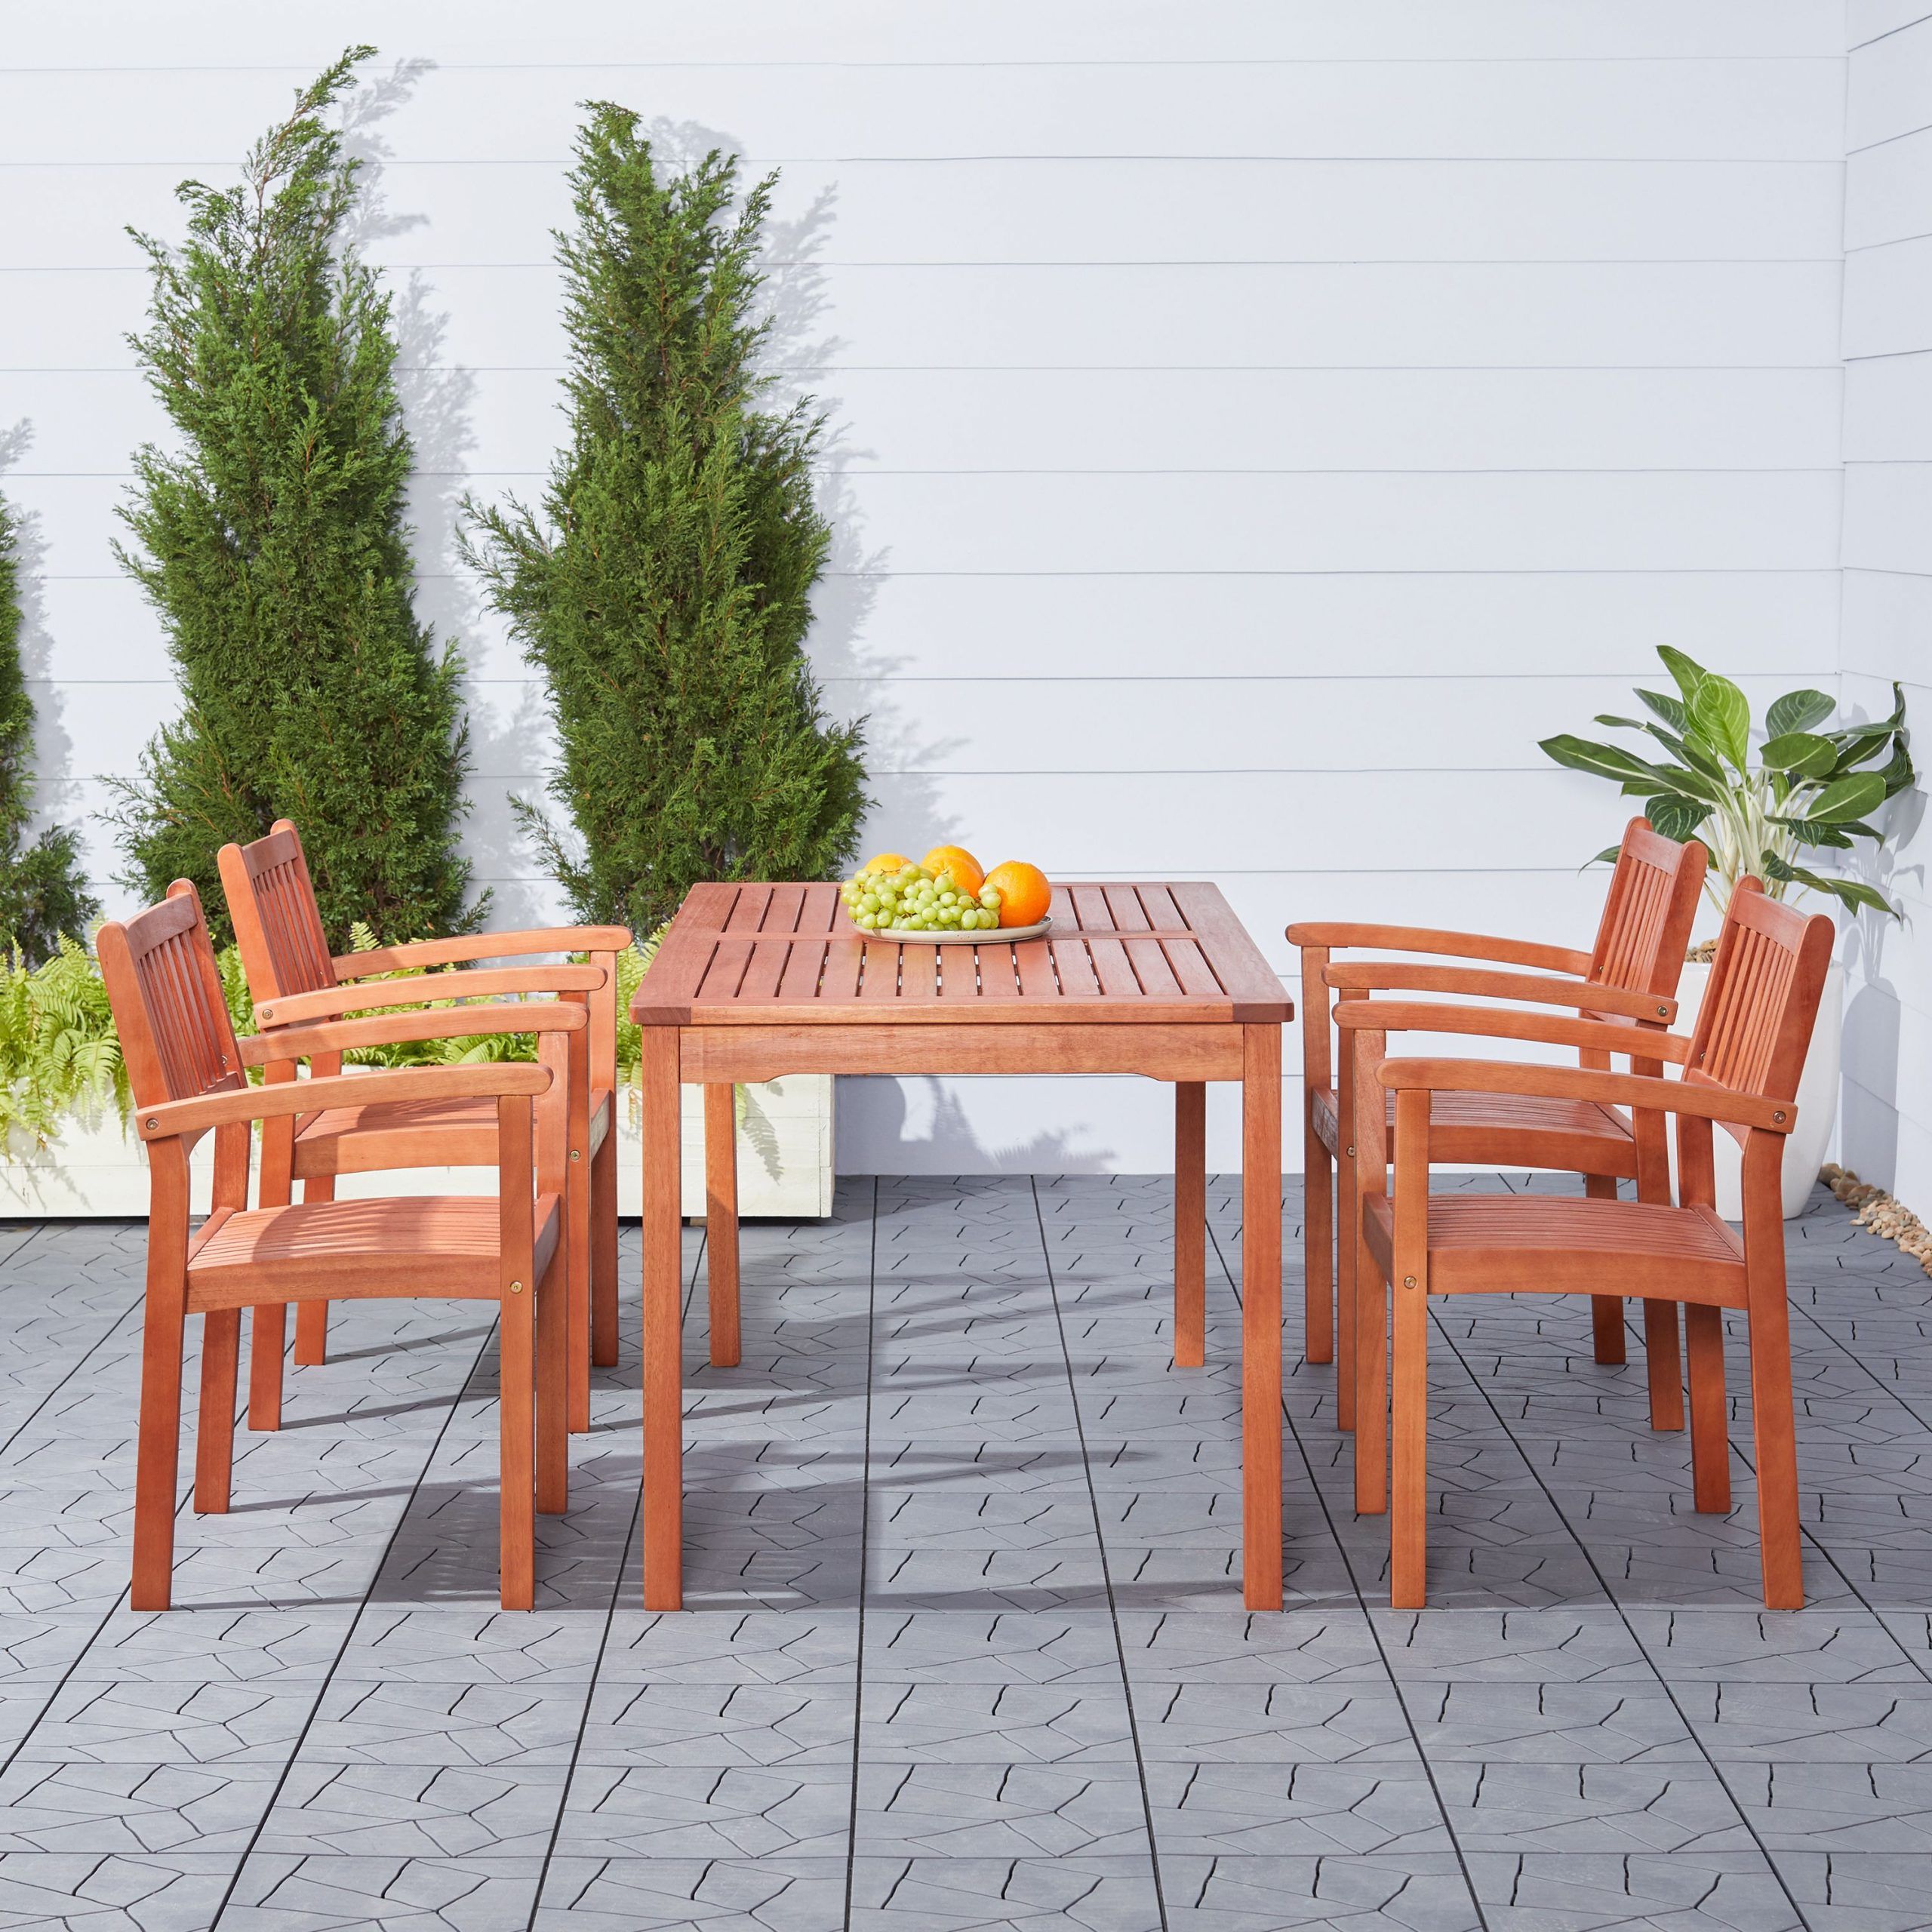 Malibu Outdoor 5 Piece Wood Patio Dining Set With Stacking Chairs Pertaining To 5 Piece Outdoor Seating Patio Sets (View 14 of 15)